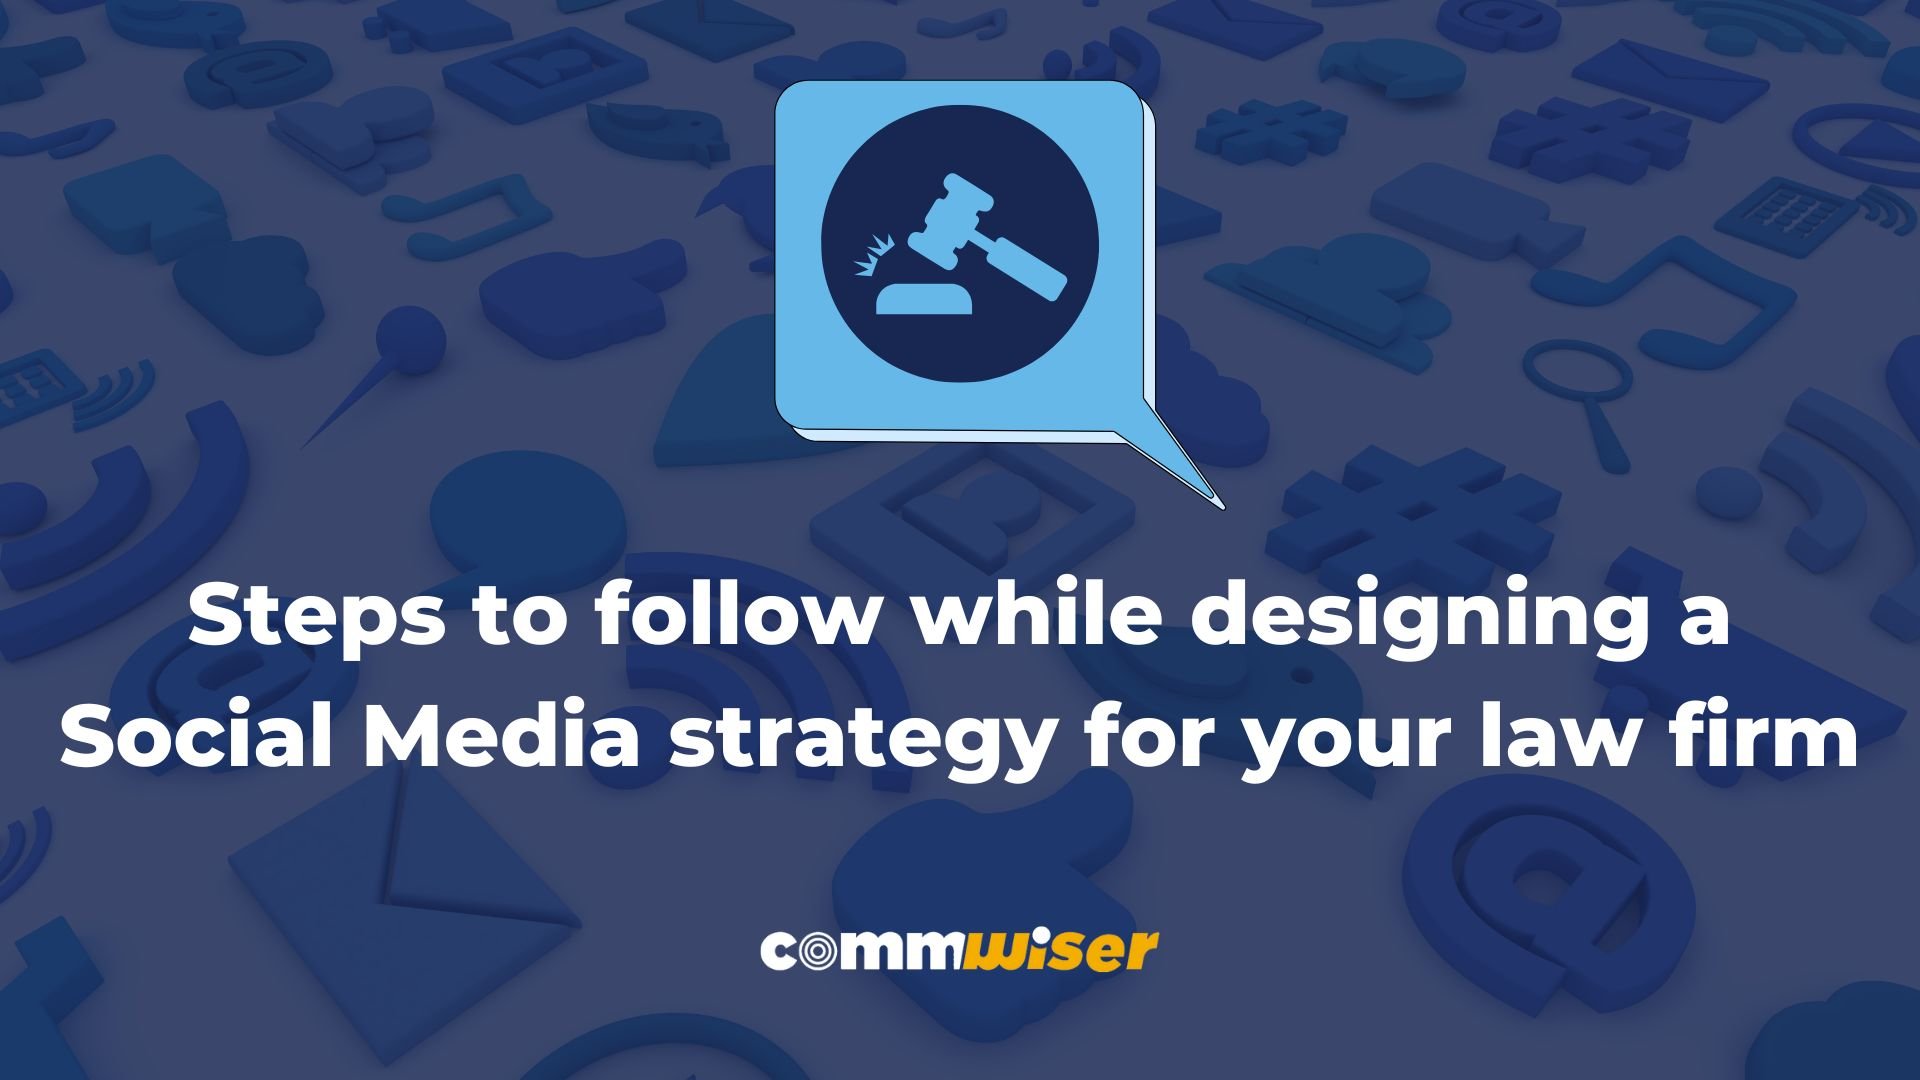 Social Media Strategy for your law firm